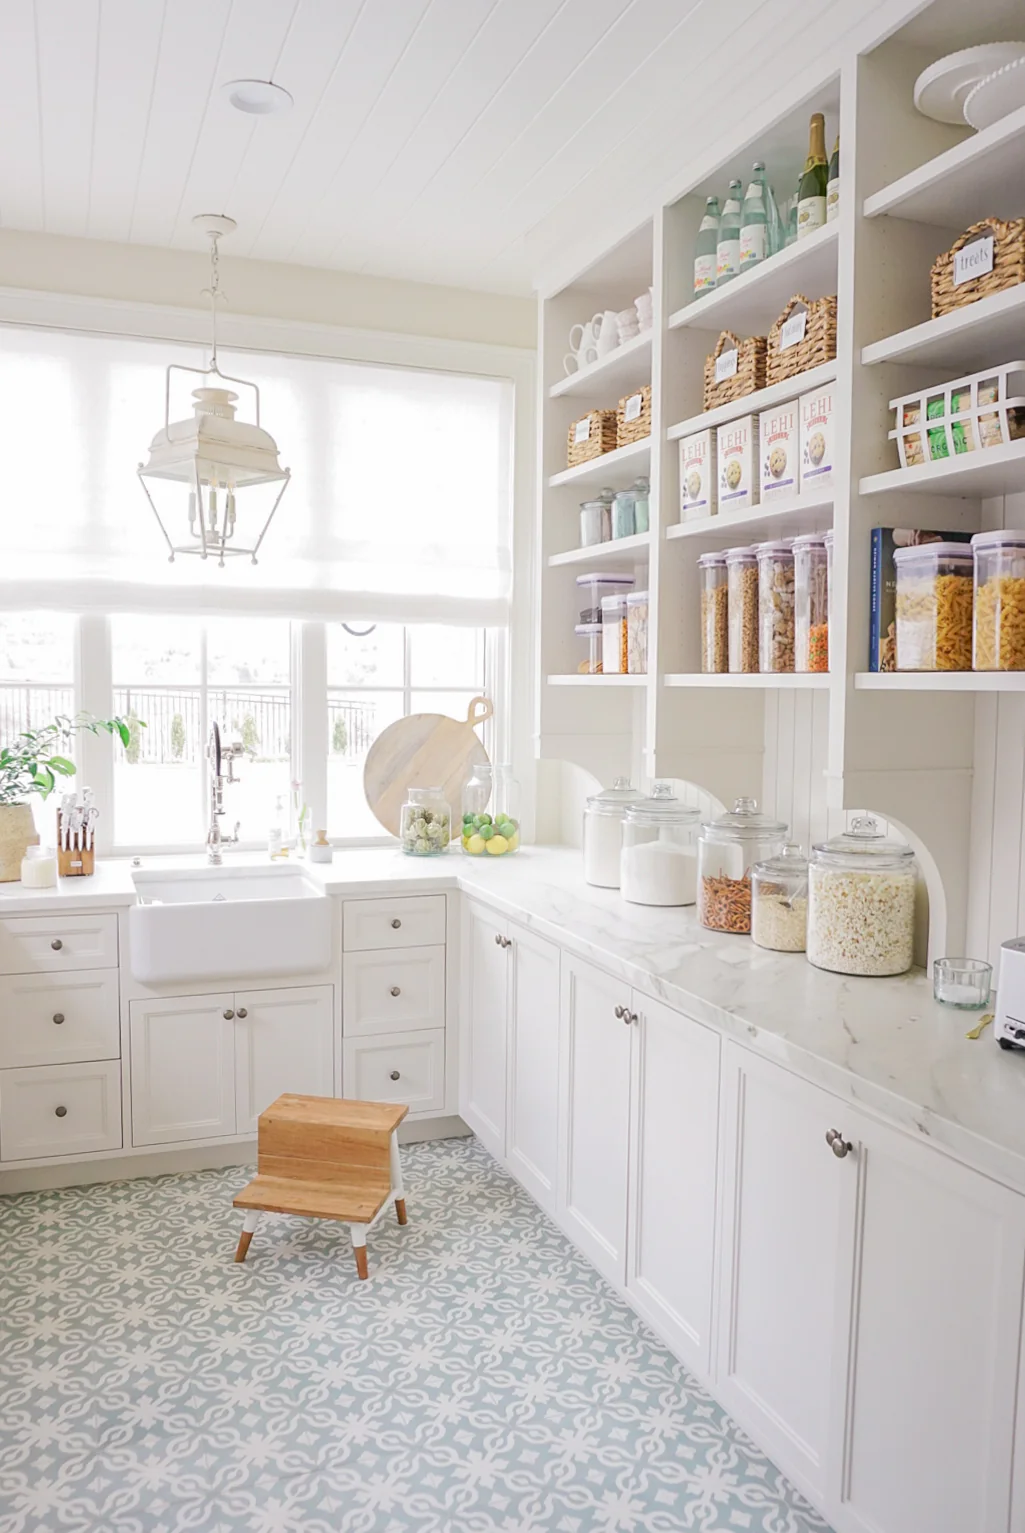 walk in pantry with blue gray tile flooring. Canisters used to organize ingredients